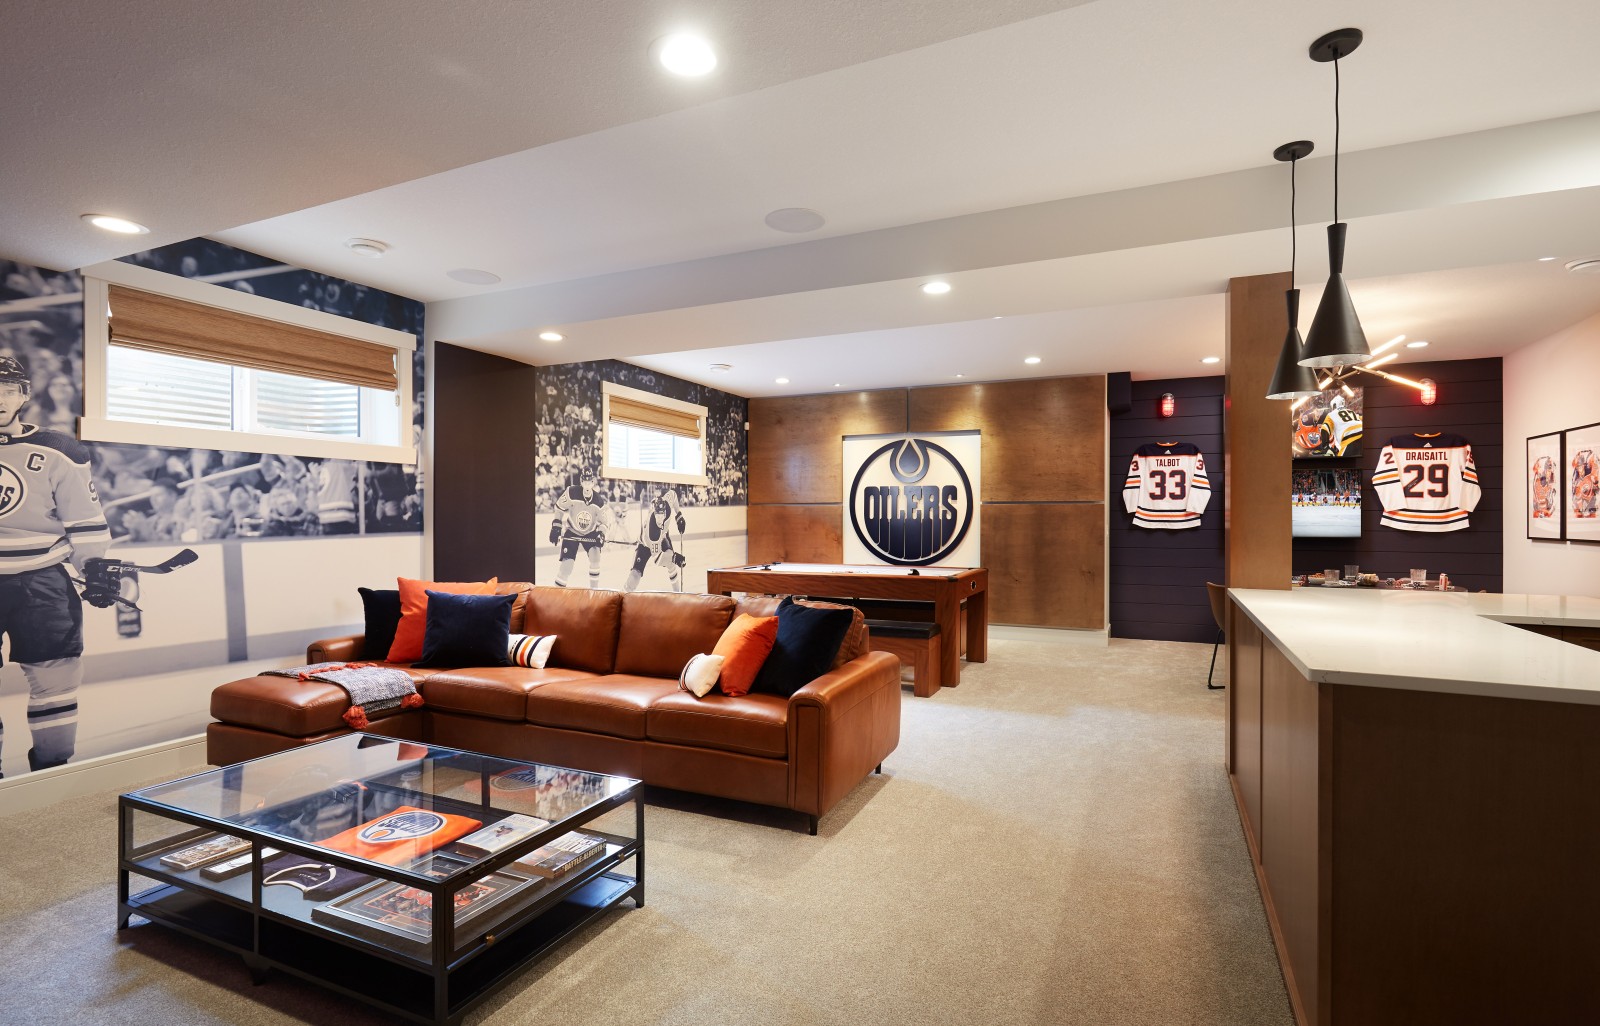 Full room photo of Oilers Fan Cave in Archer Showhome that features warm woods, large mural that spans the far wall, cozy brown leather couch and blue accents